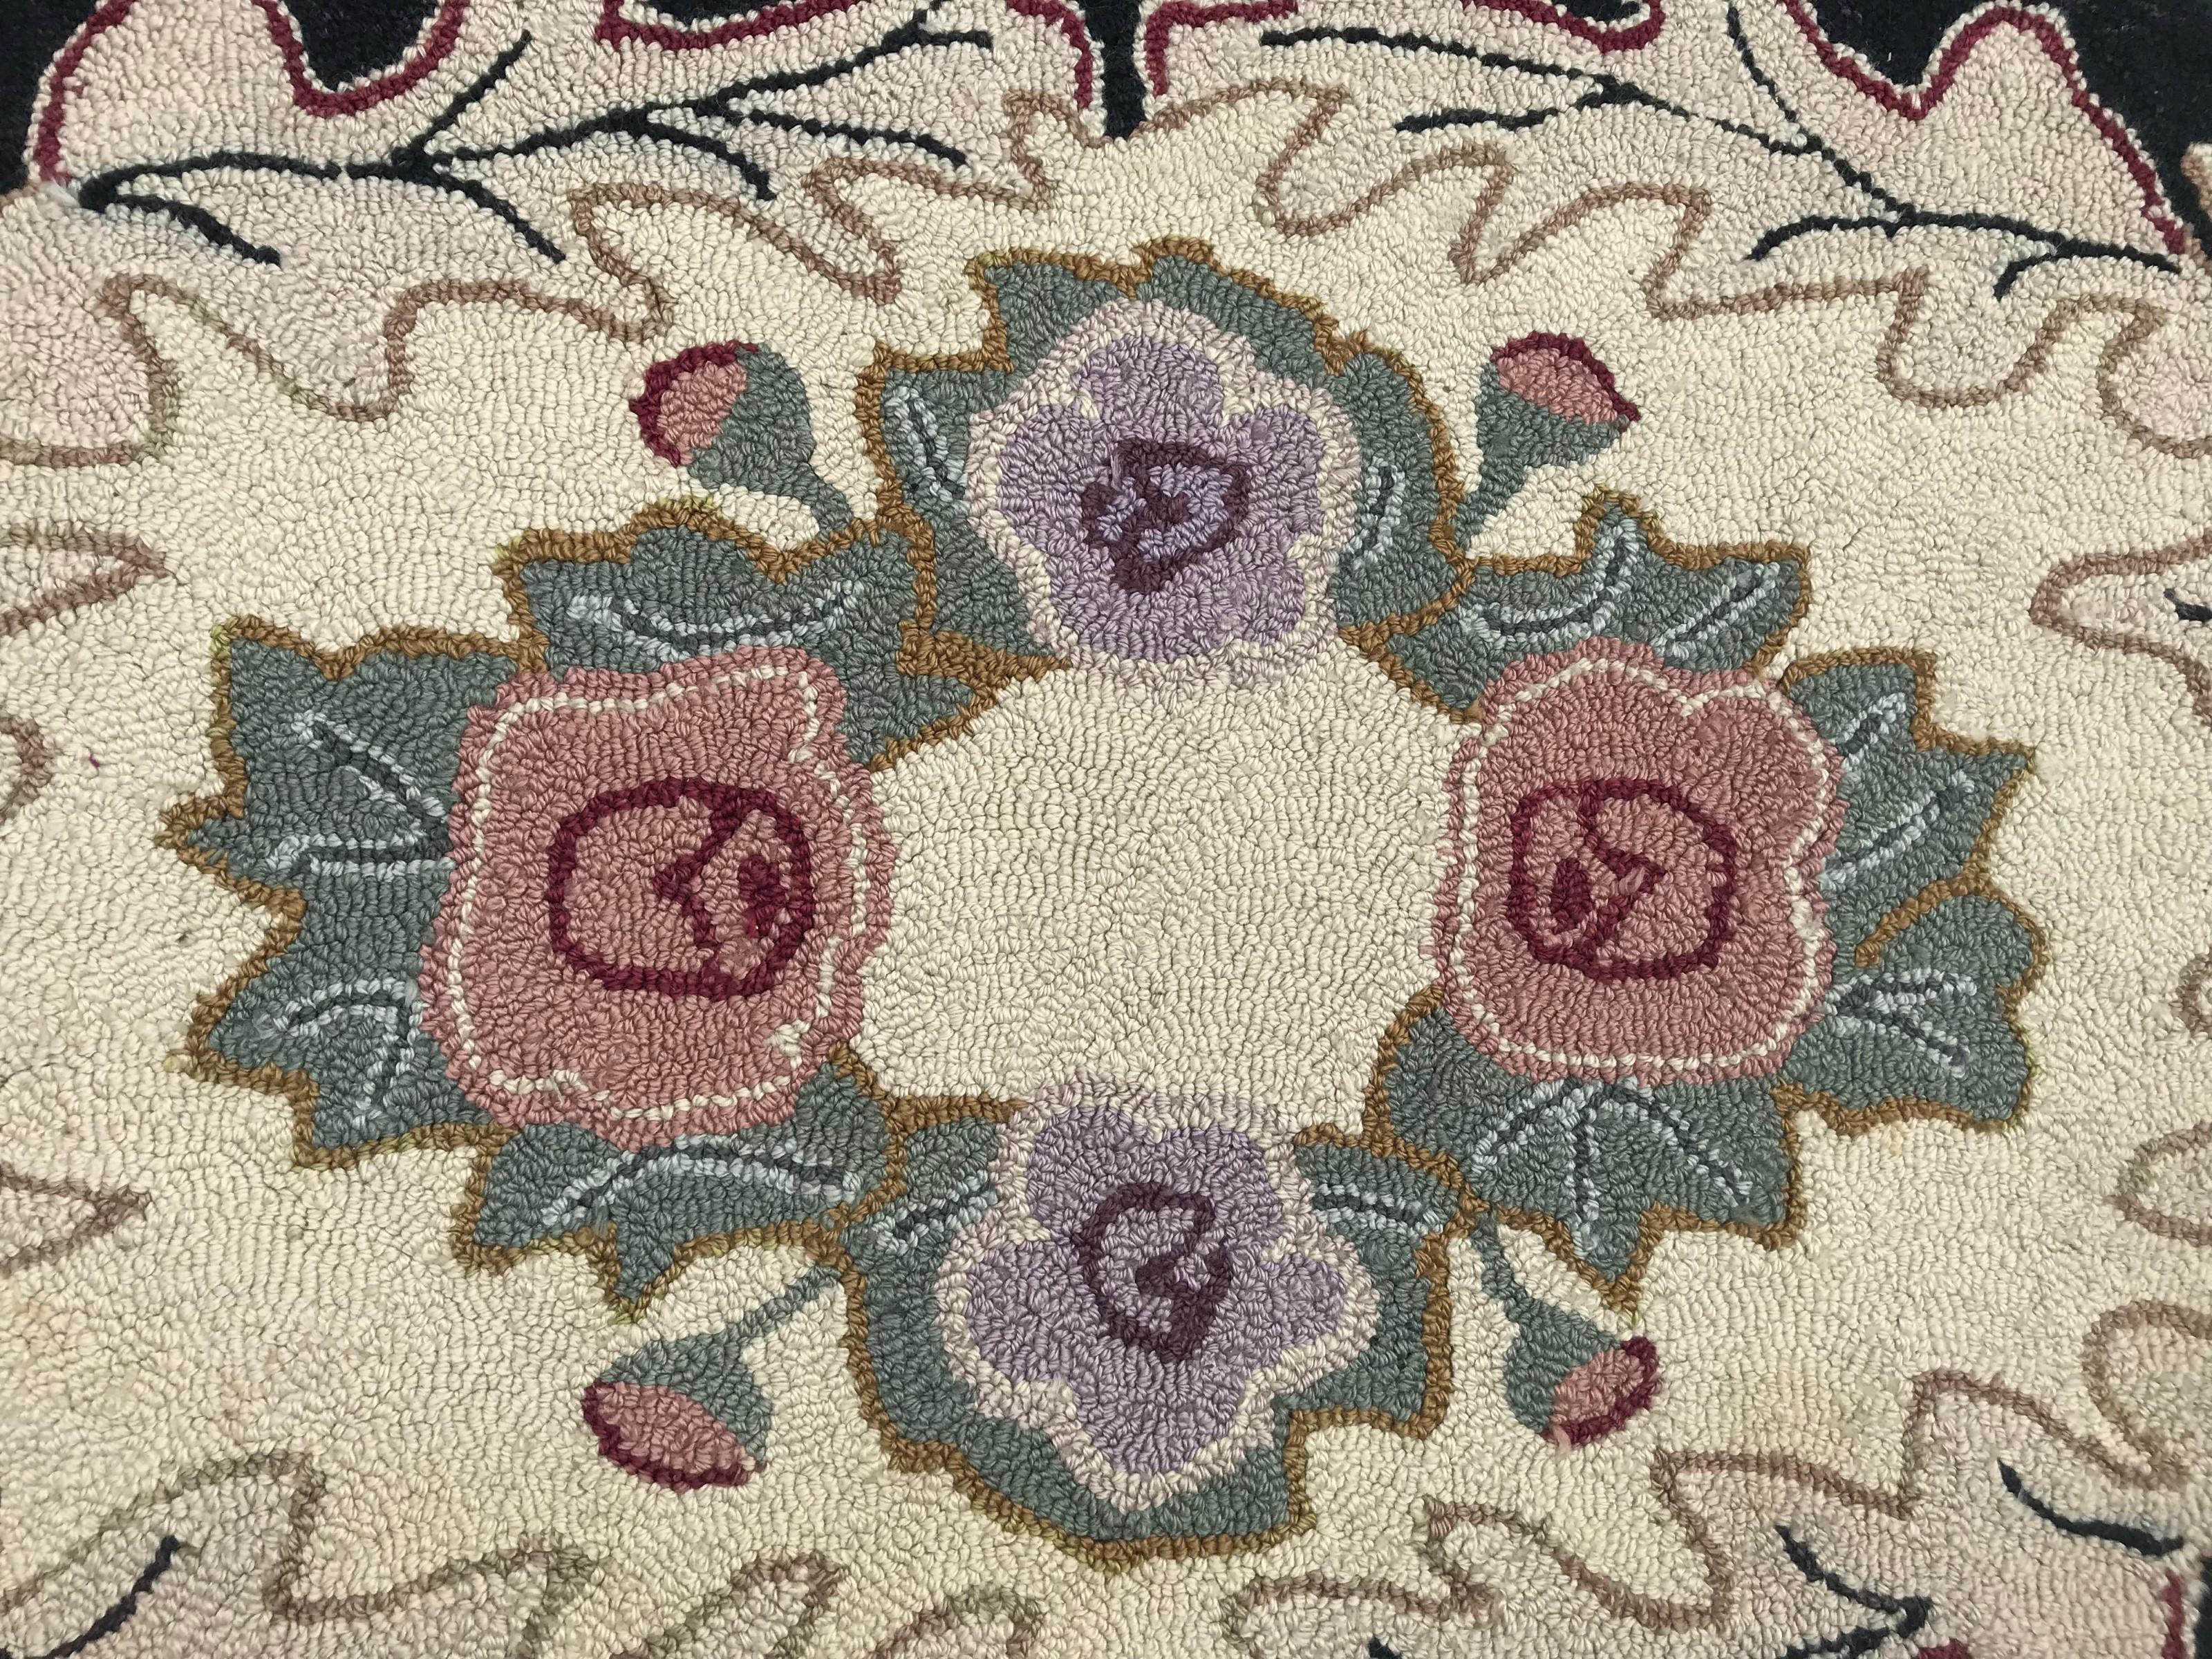 Beautiful American Hook rug, with a decorative floral design, entirely American needlework made with wool velvet on cotton foundations.

✨✨✨
